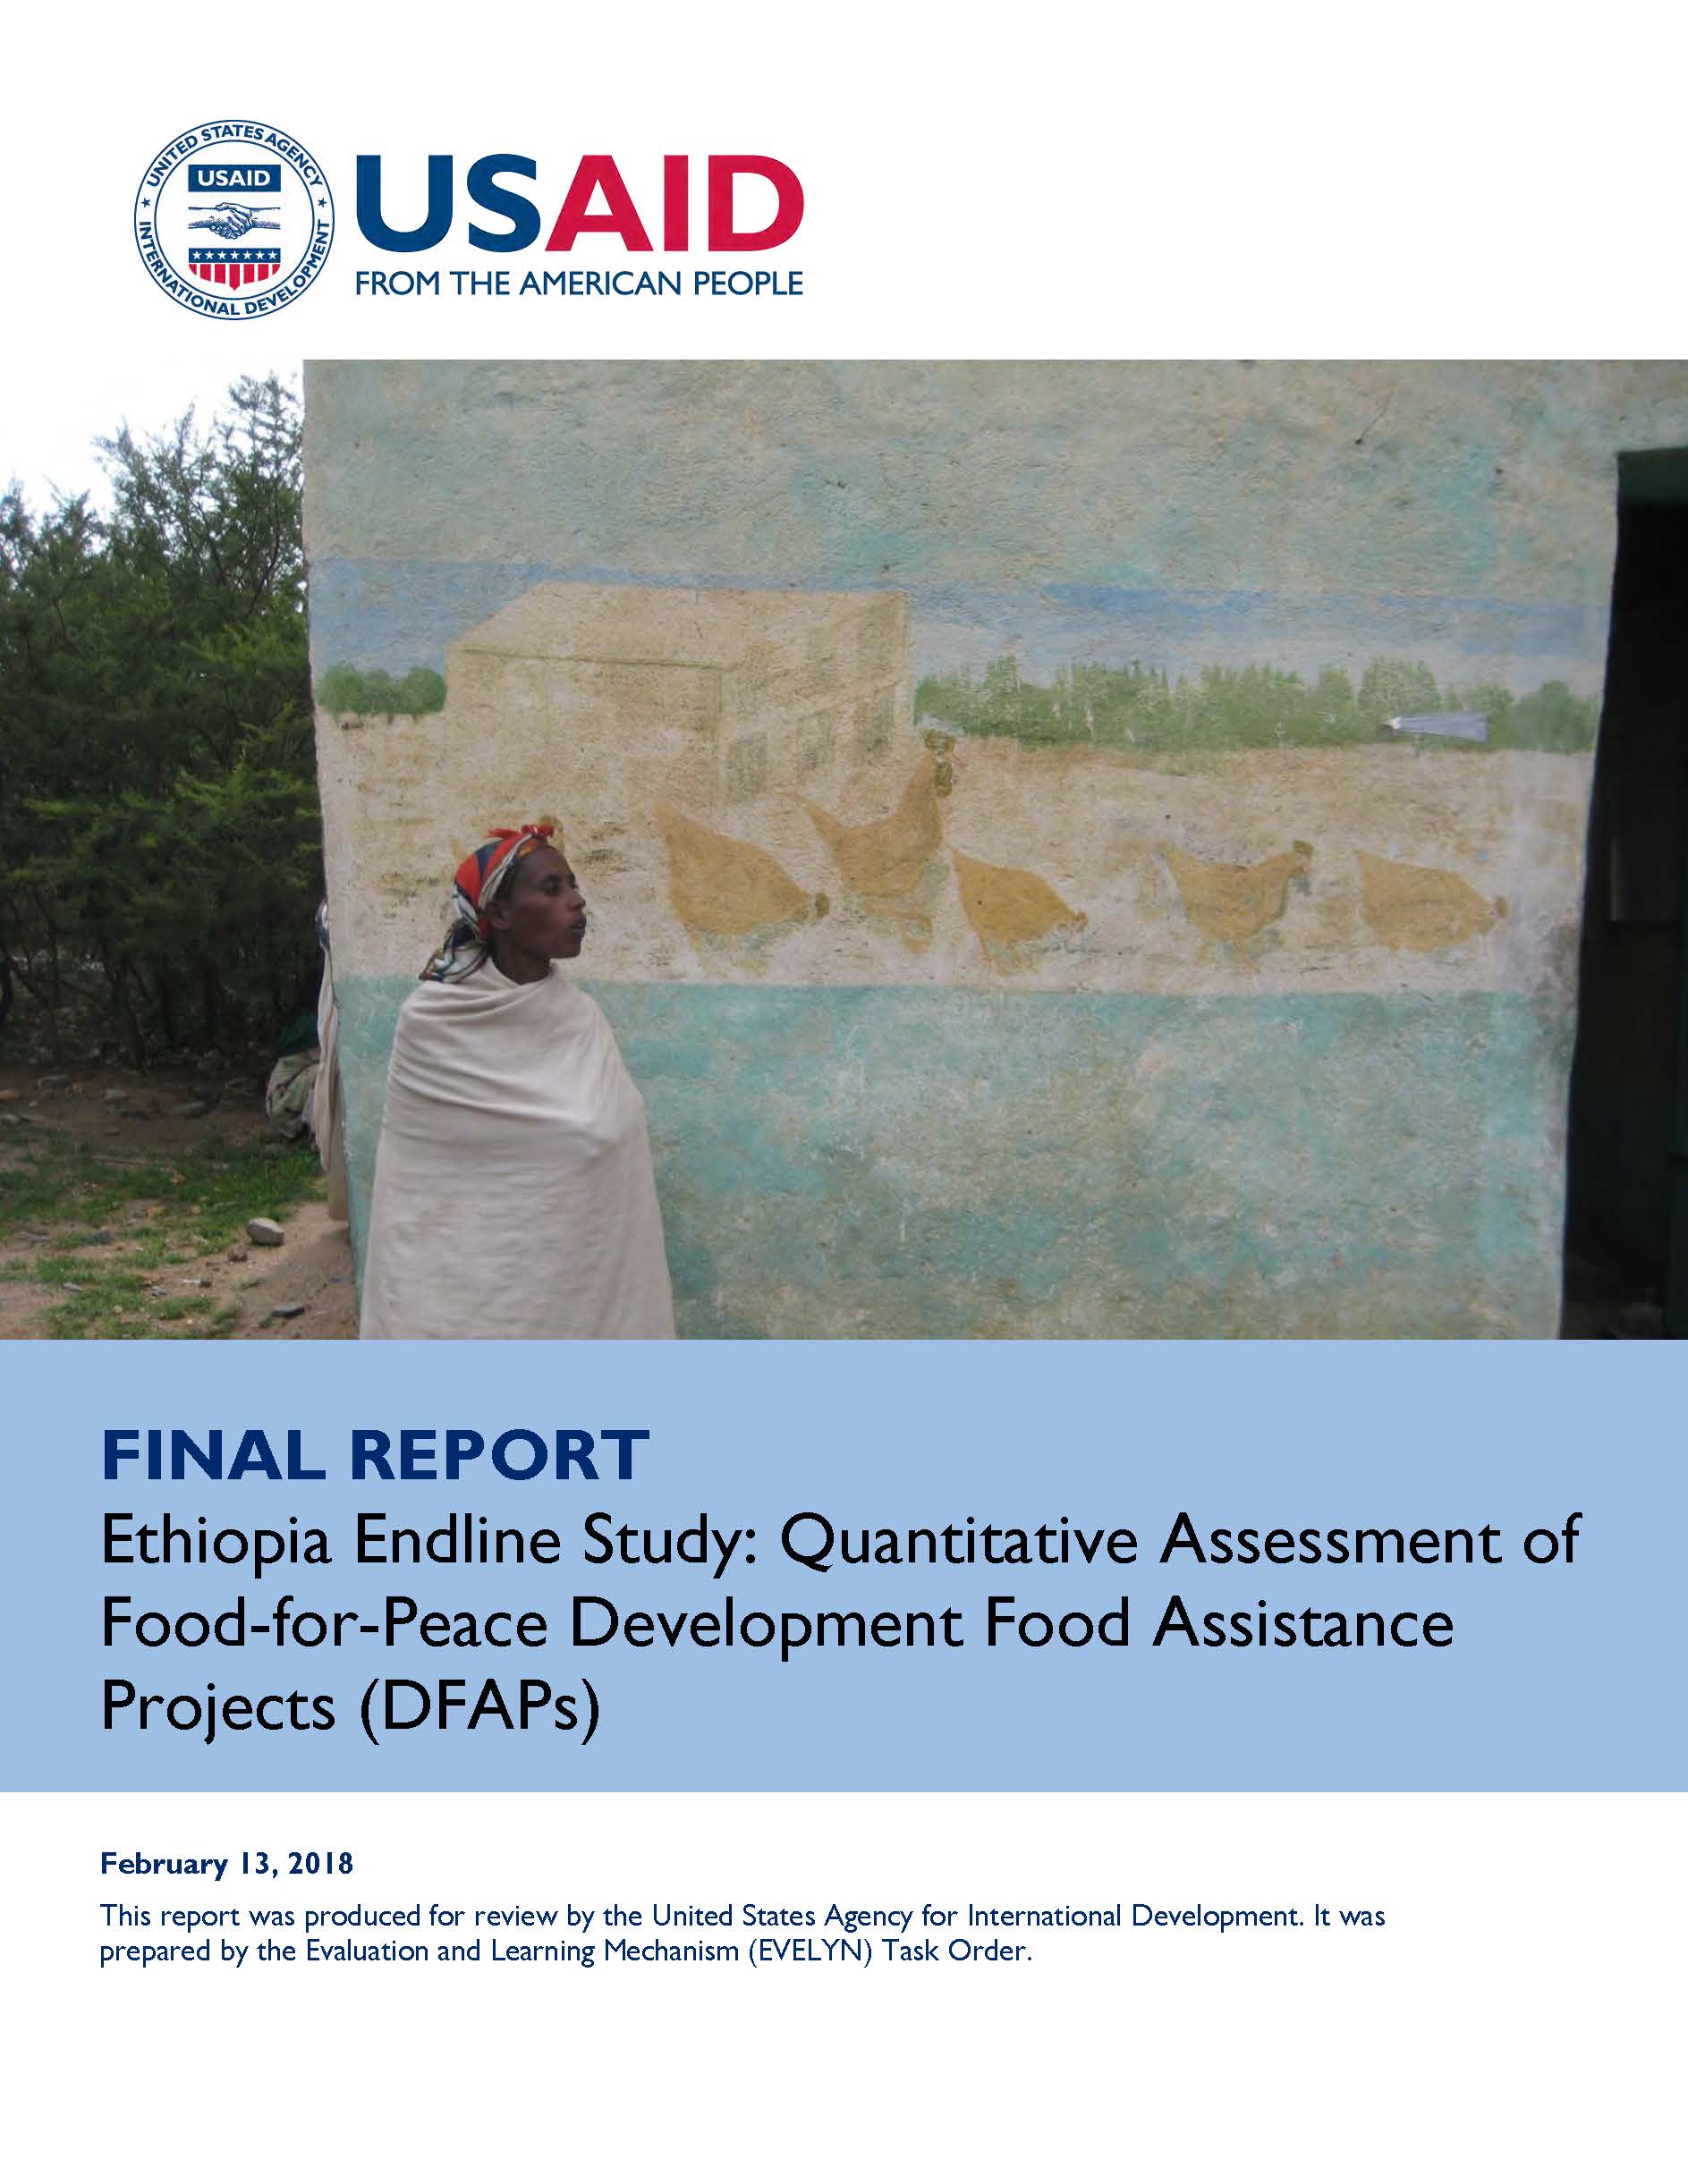 Cover Page for FINAL REPORT Ethiopia Endline Study: Quantitative Assessment of Food-for-Peace Development Food Assistance Projects (DFAPs)